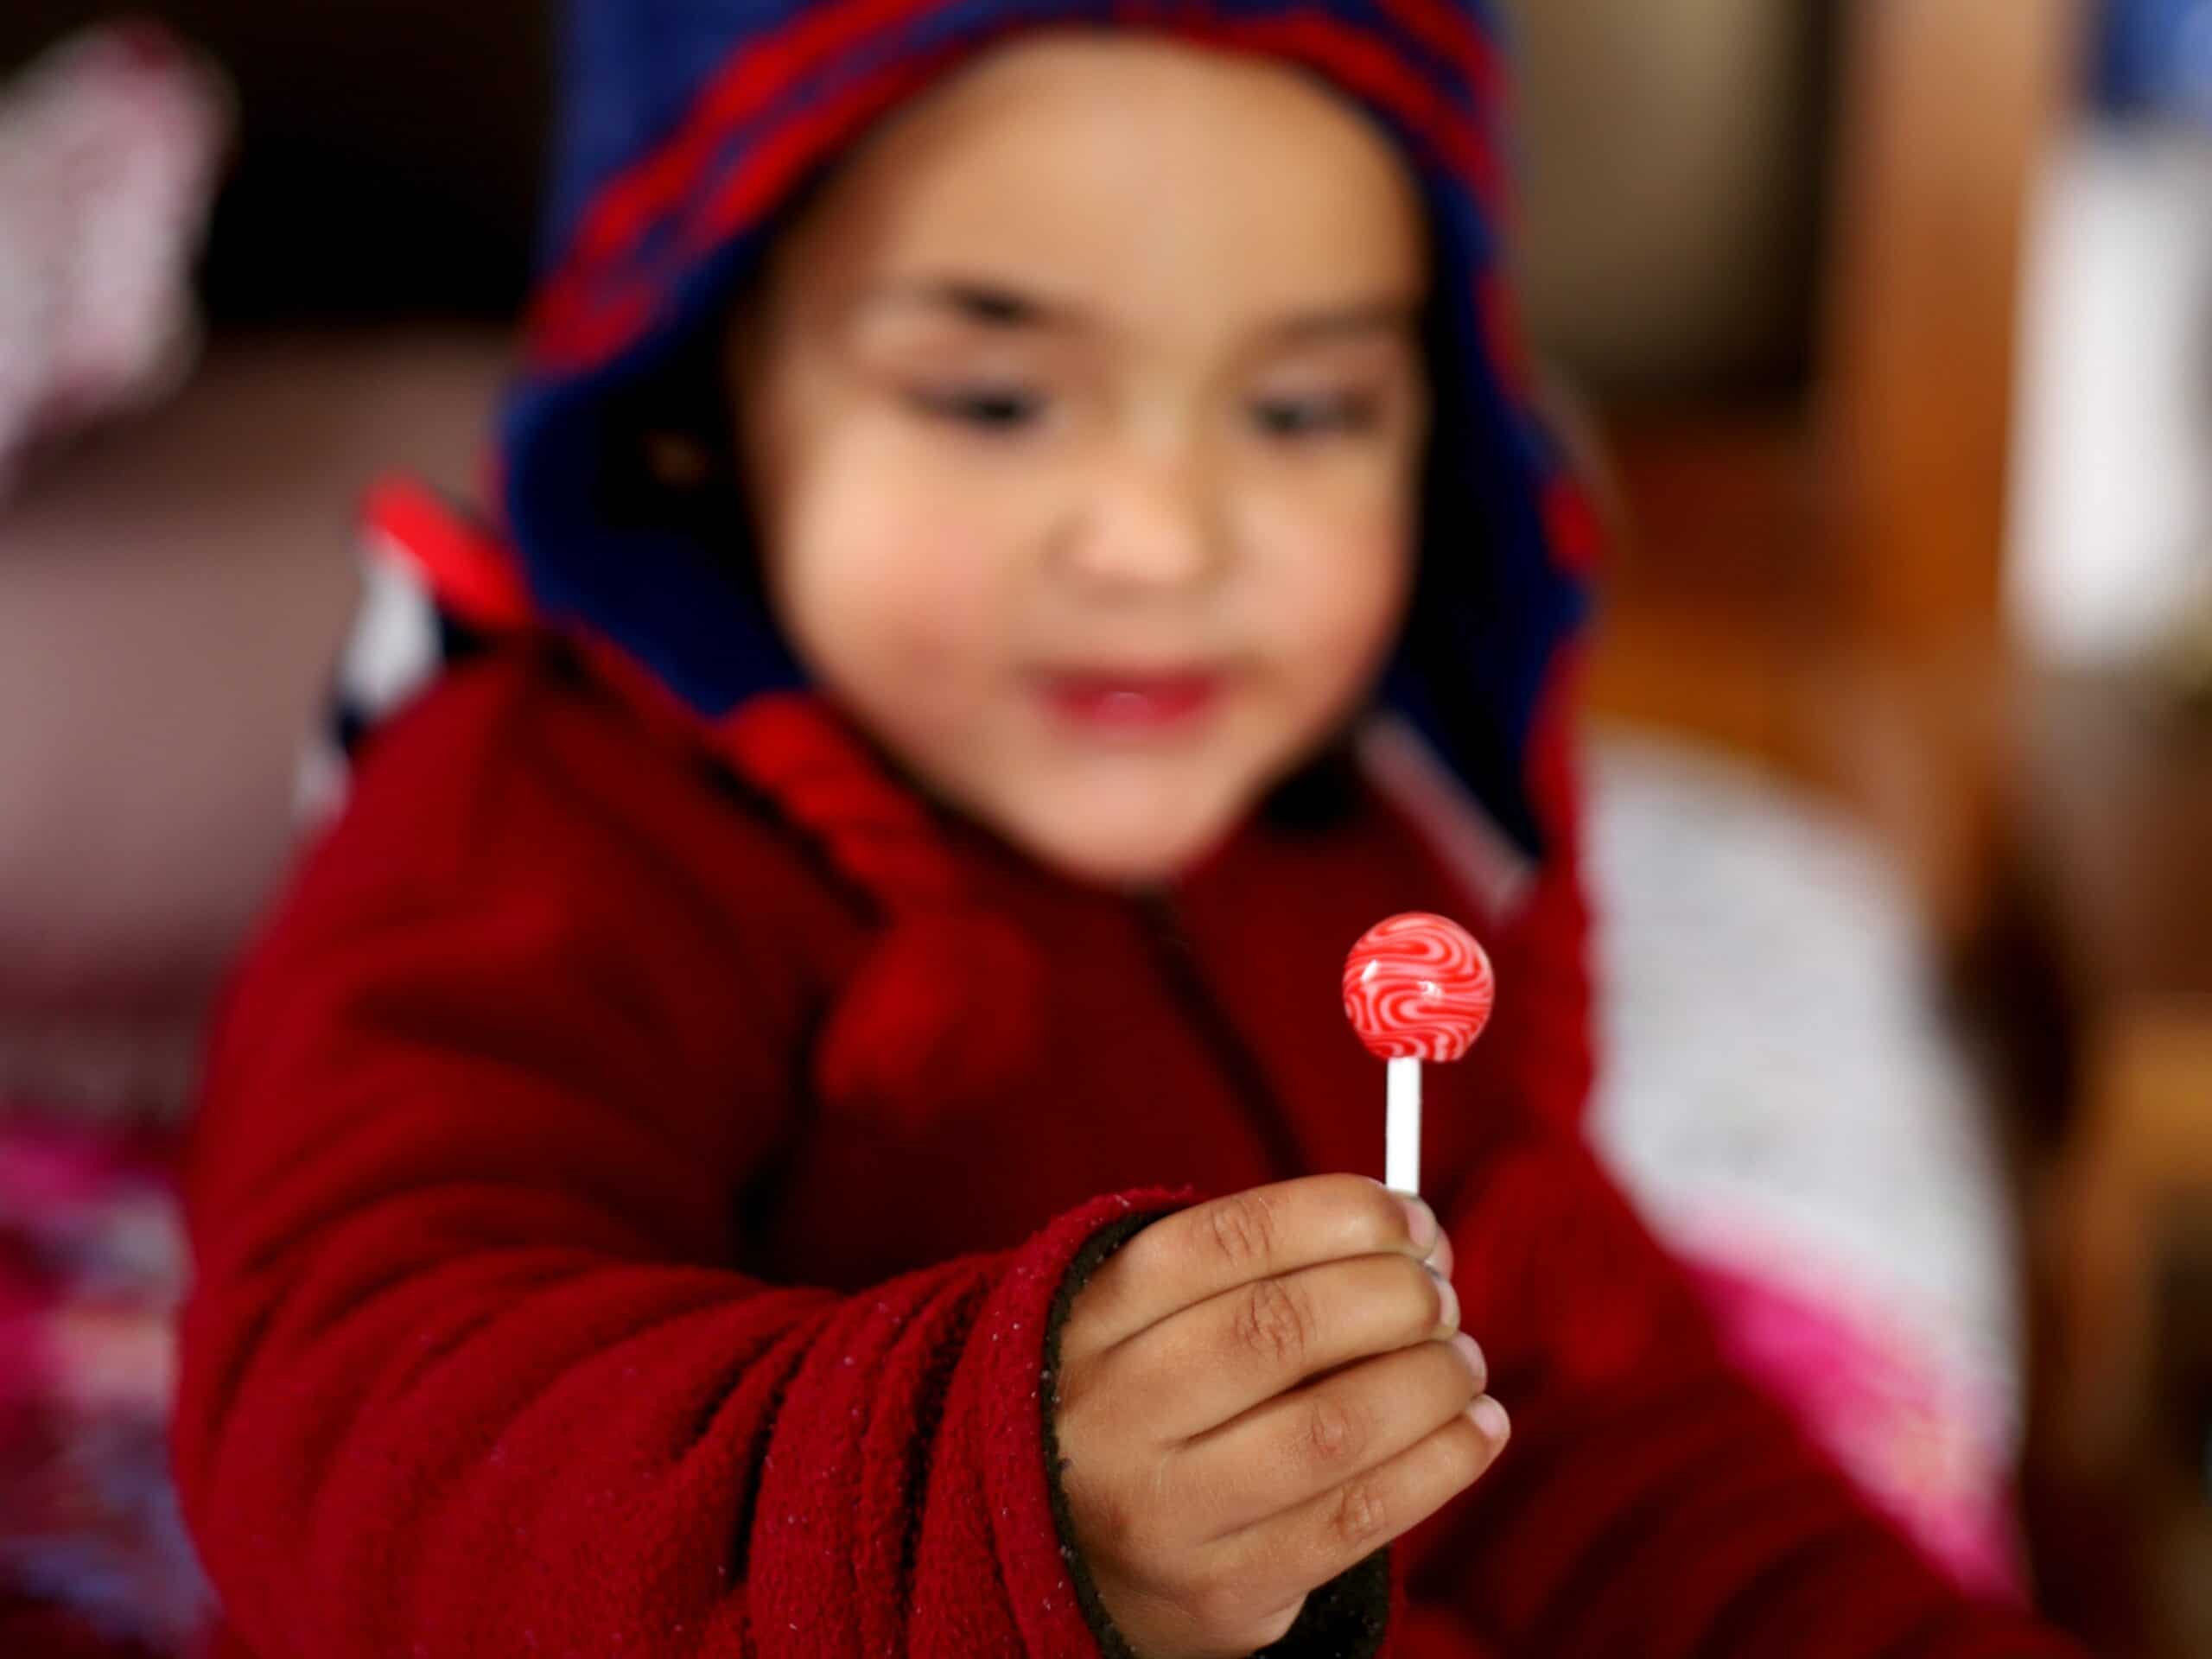 boy with a red lollipop